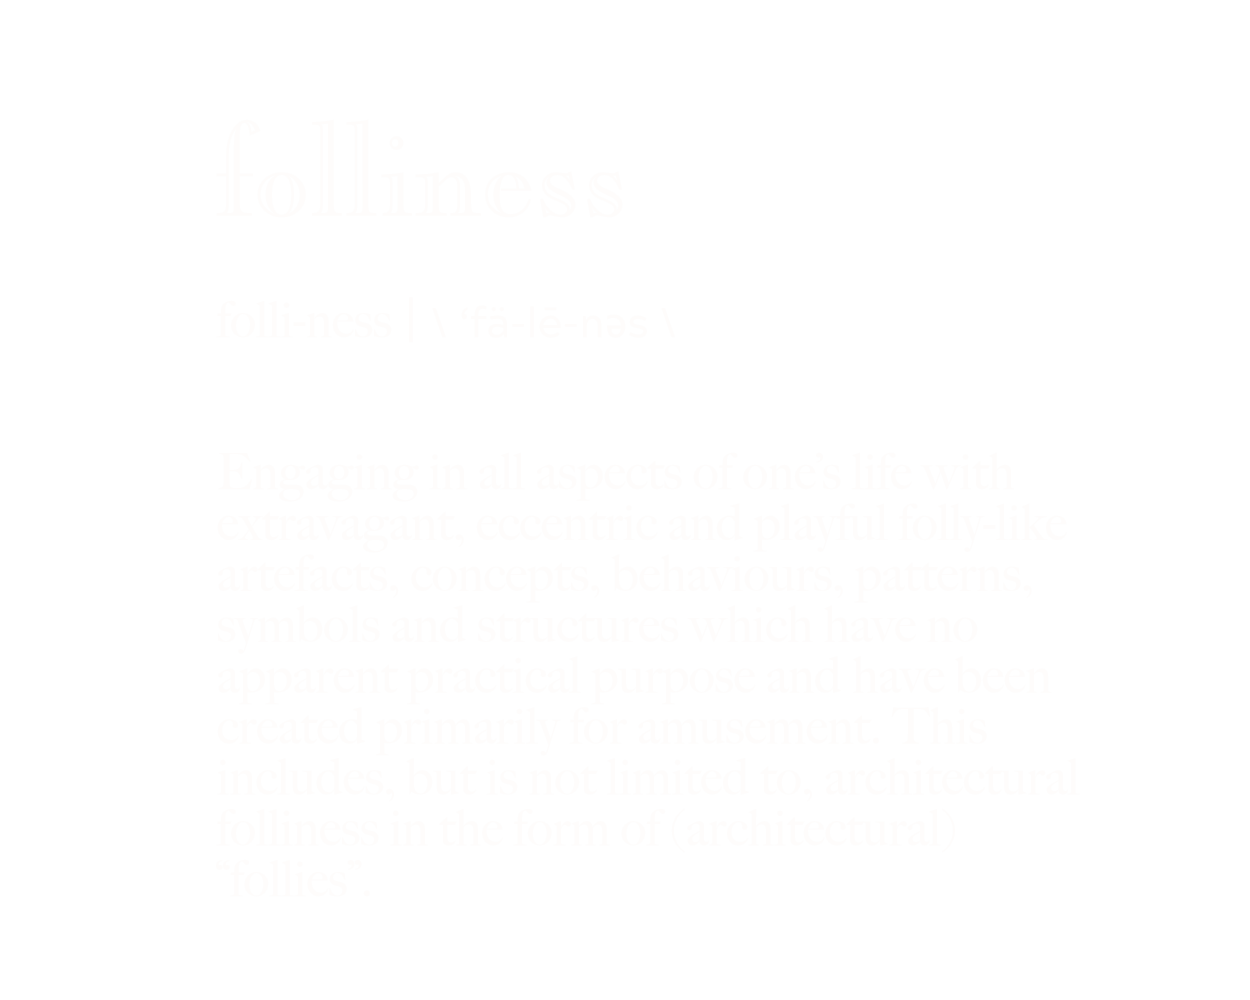 Folliness: folli-ness | the phonetic alphabet for the word folliness follows: \ ‘fä-lē-nǝs \ . Engaging in all aspects of one’s life with extravagant, eccentric, absurd, playful and folly-like artefacts, concepts, behaviours, patterns, symbols and structures which have no apparent practical purpose and have been created primarily for amusement. This includes, but is not limited to, architectural folliness in the form of (architectural) “follies”.